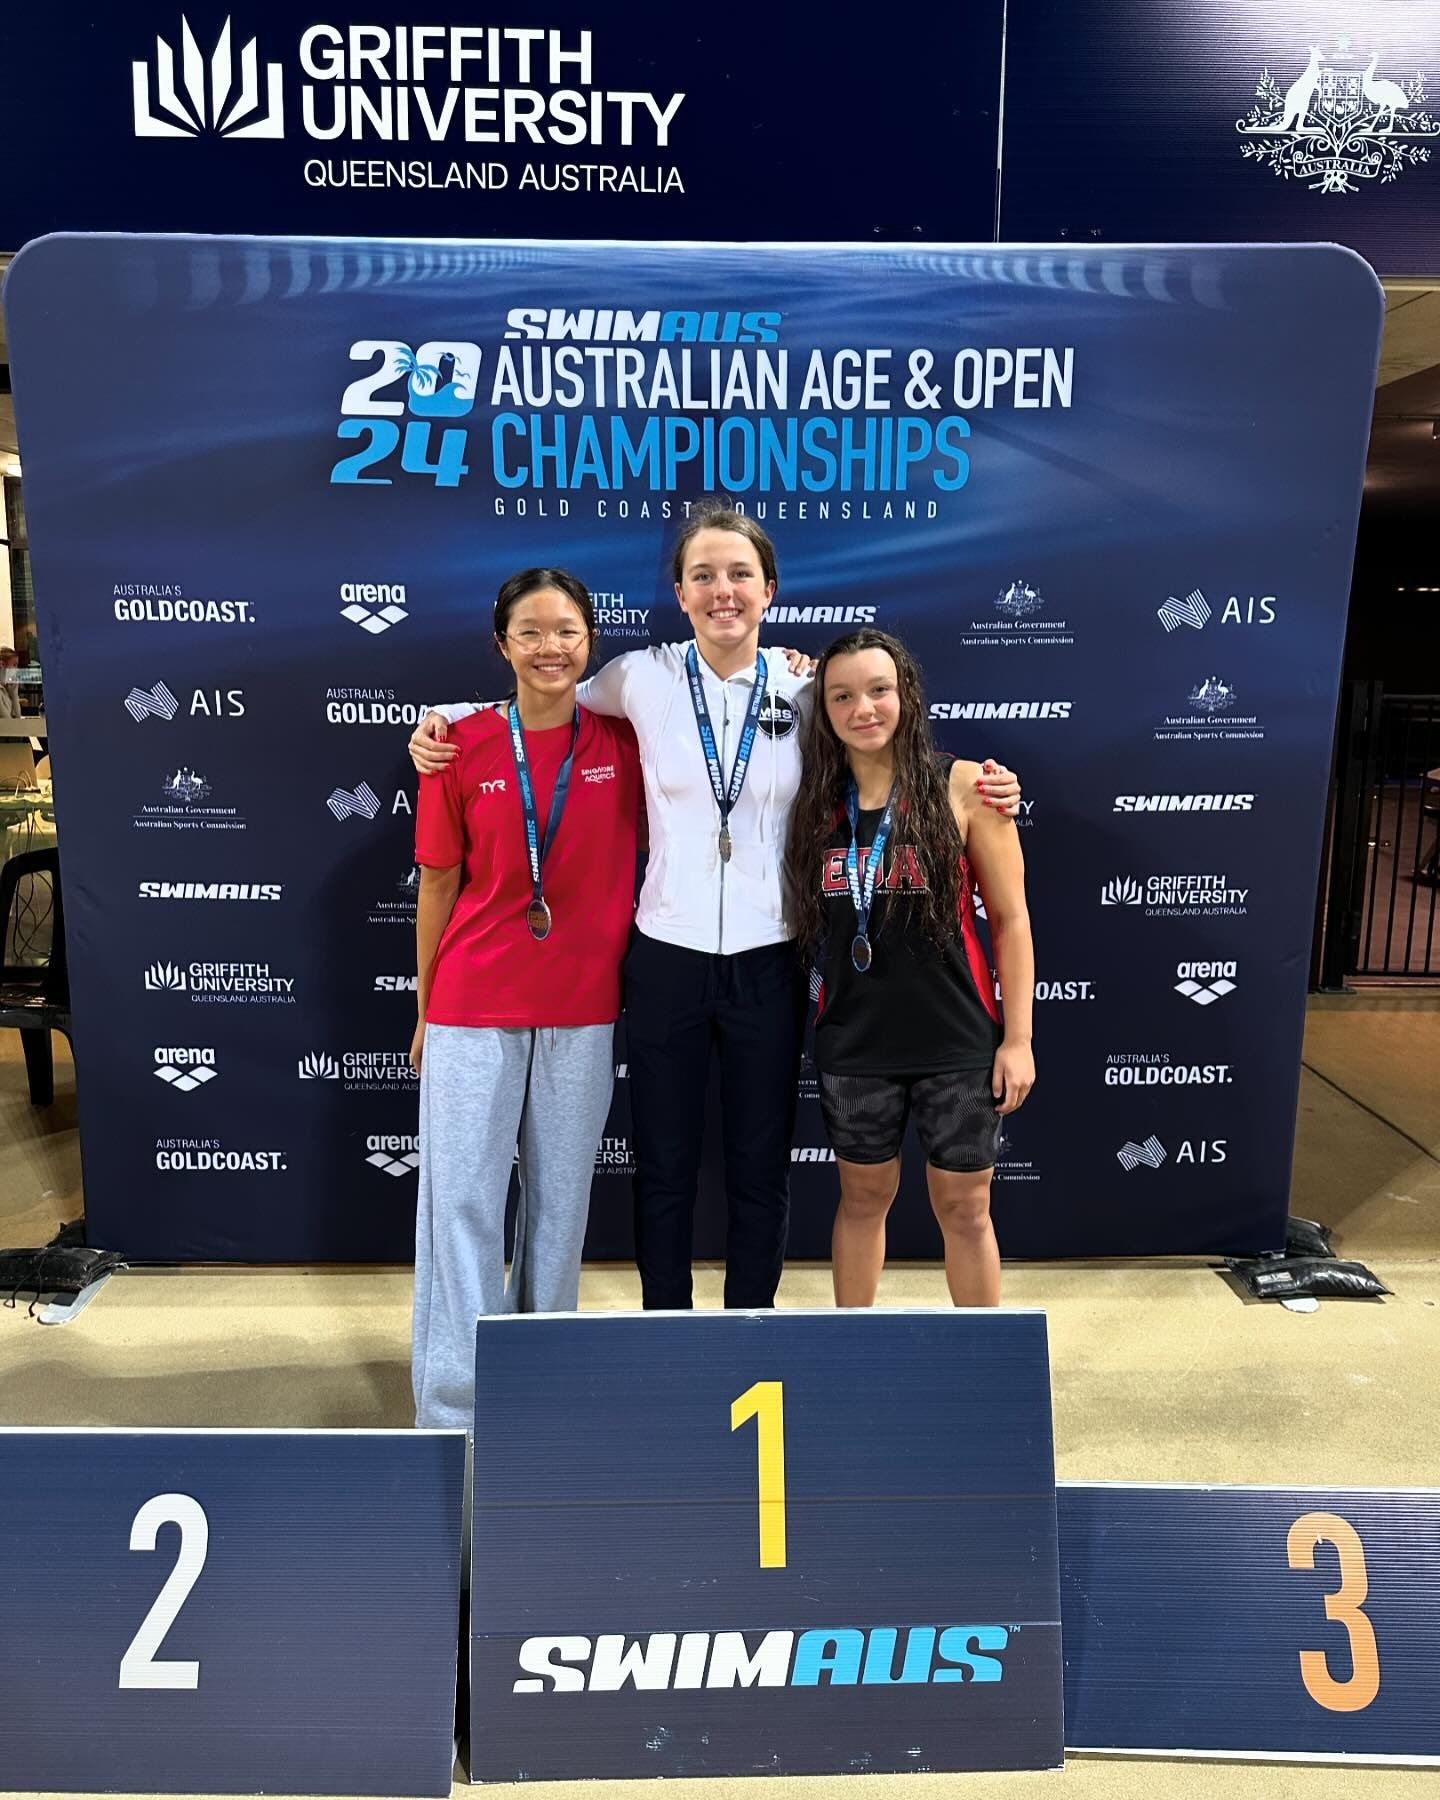 Australian Age Championships 🤩
&bull;
Worth the wait! 
Day 9 of the championships and we have our best result at National Level. Congratulations Mia on winning a Bronze Medal in the 14yrs 200m Butterfly in a new PB time of 2.21.79. A time that also 